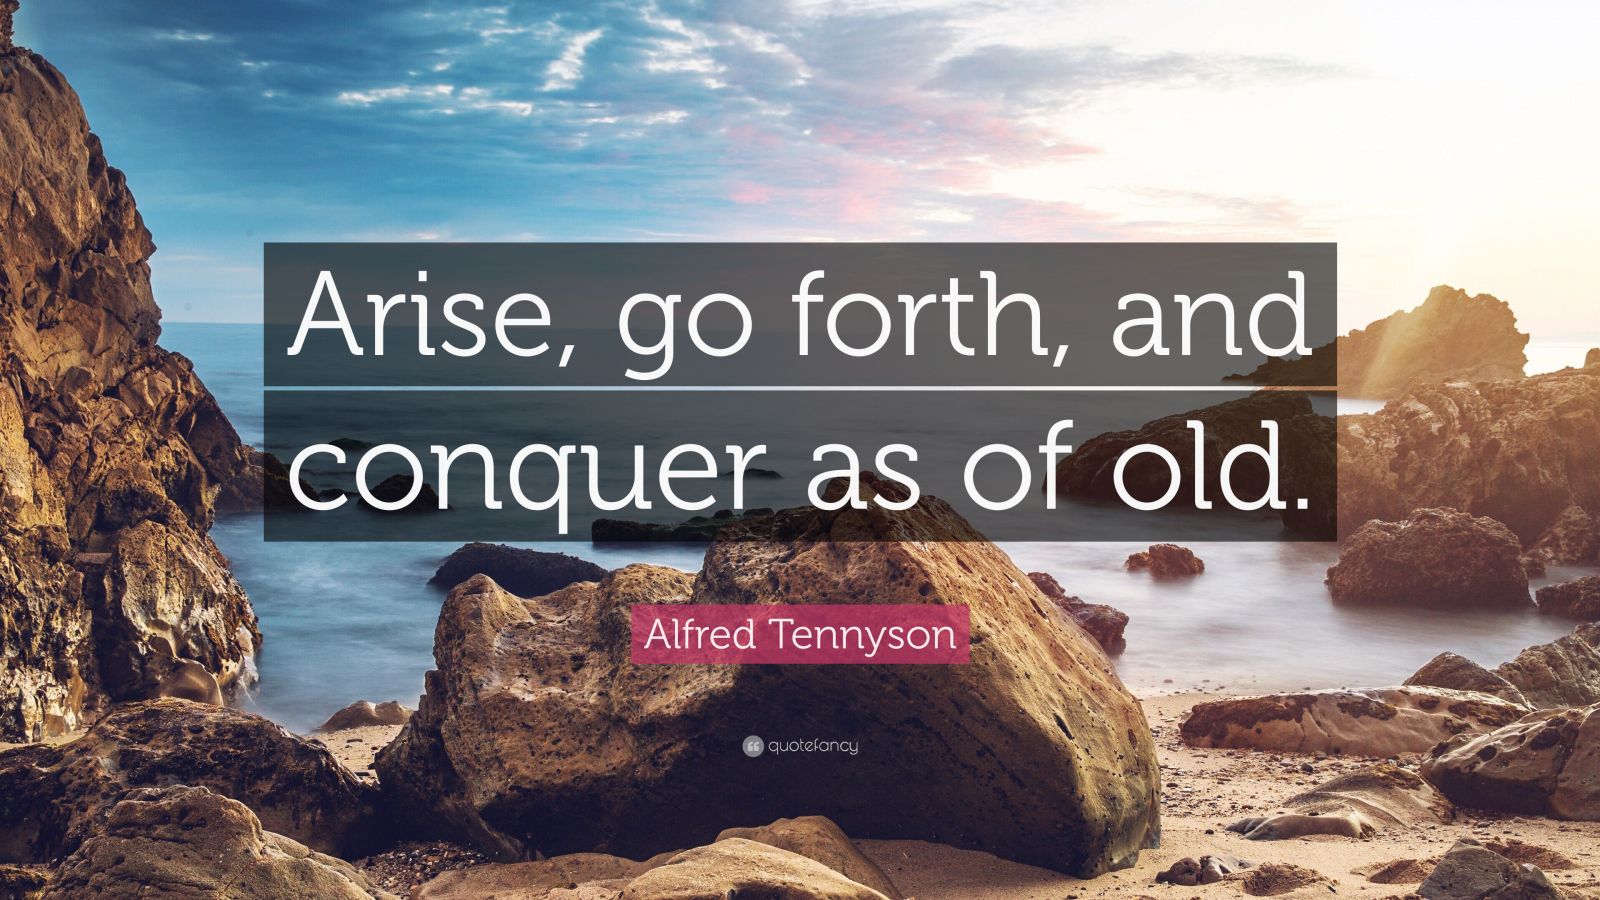 Alfred Tennyson Quote: “Arise, go forth, and conquer as of old.” (12